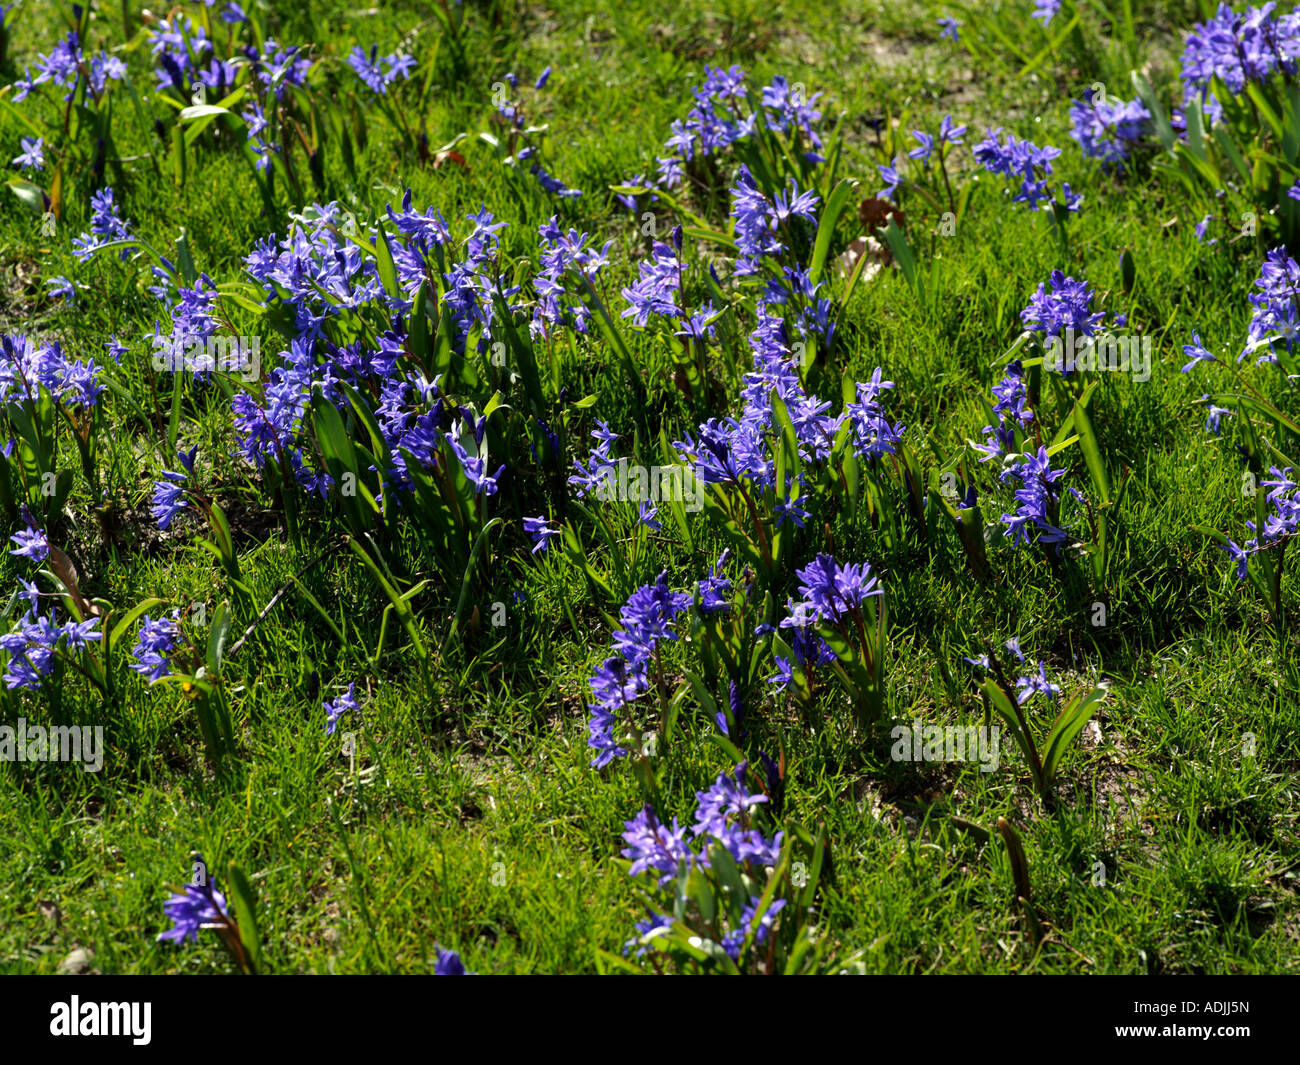 Alpine Squill member of the Lily family Growing in Carshalton Park Surrey England Scilla Bifolia Stock Photo